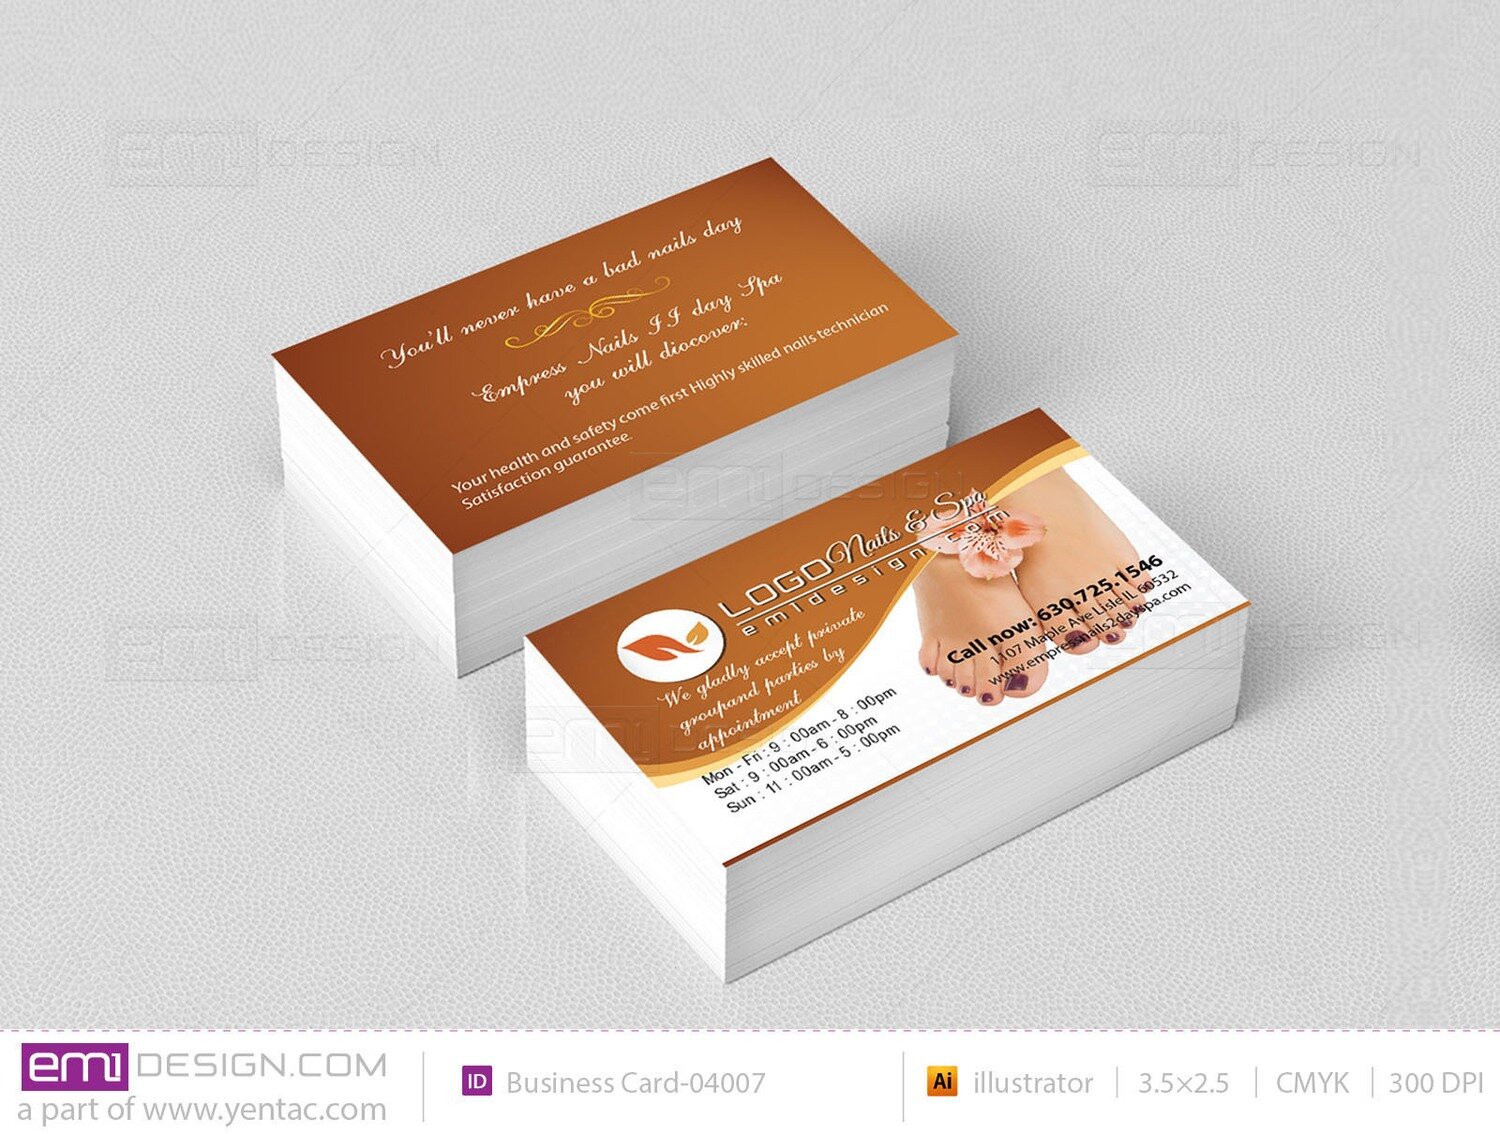 Business Card Template BusCard-04007